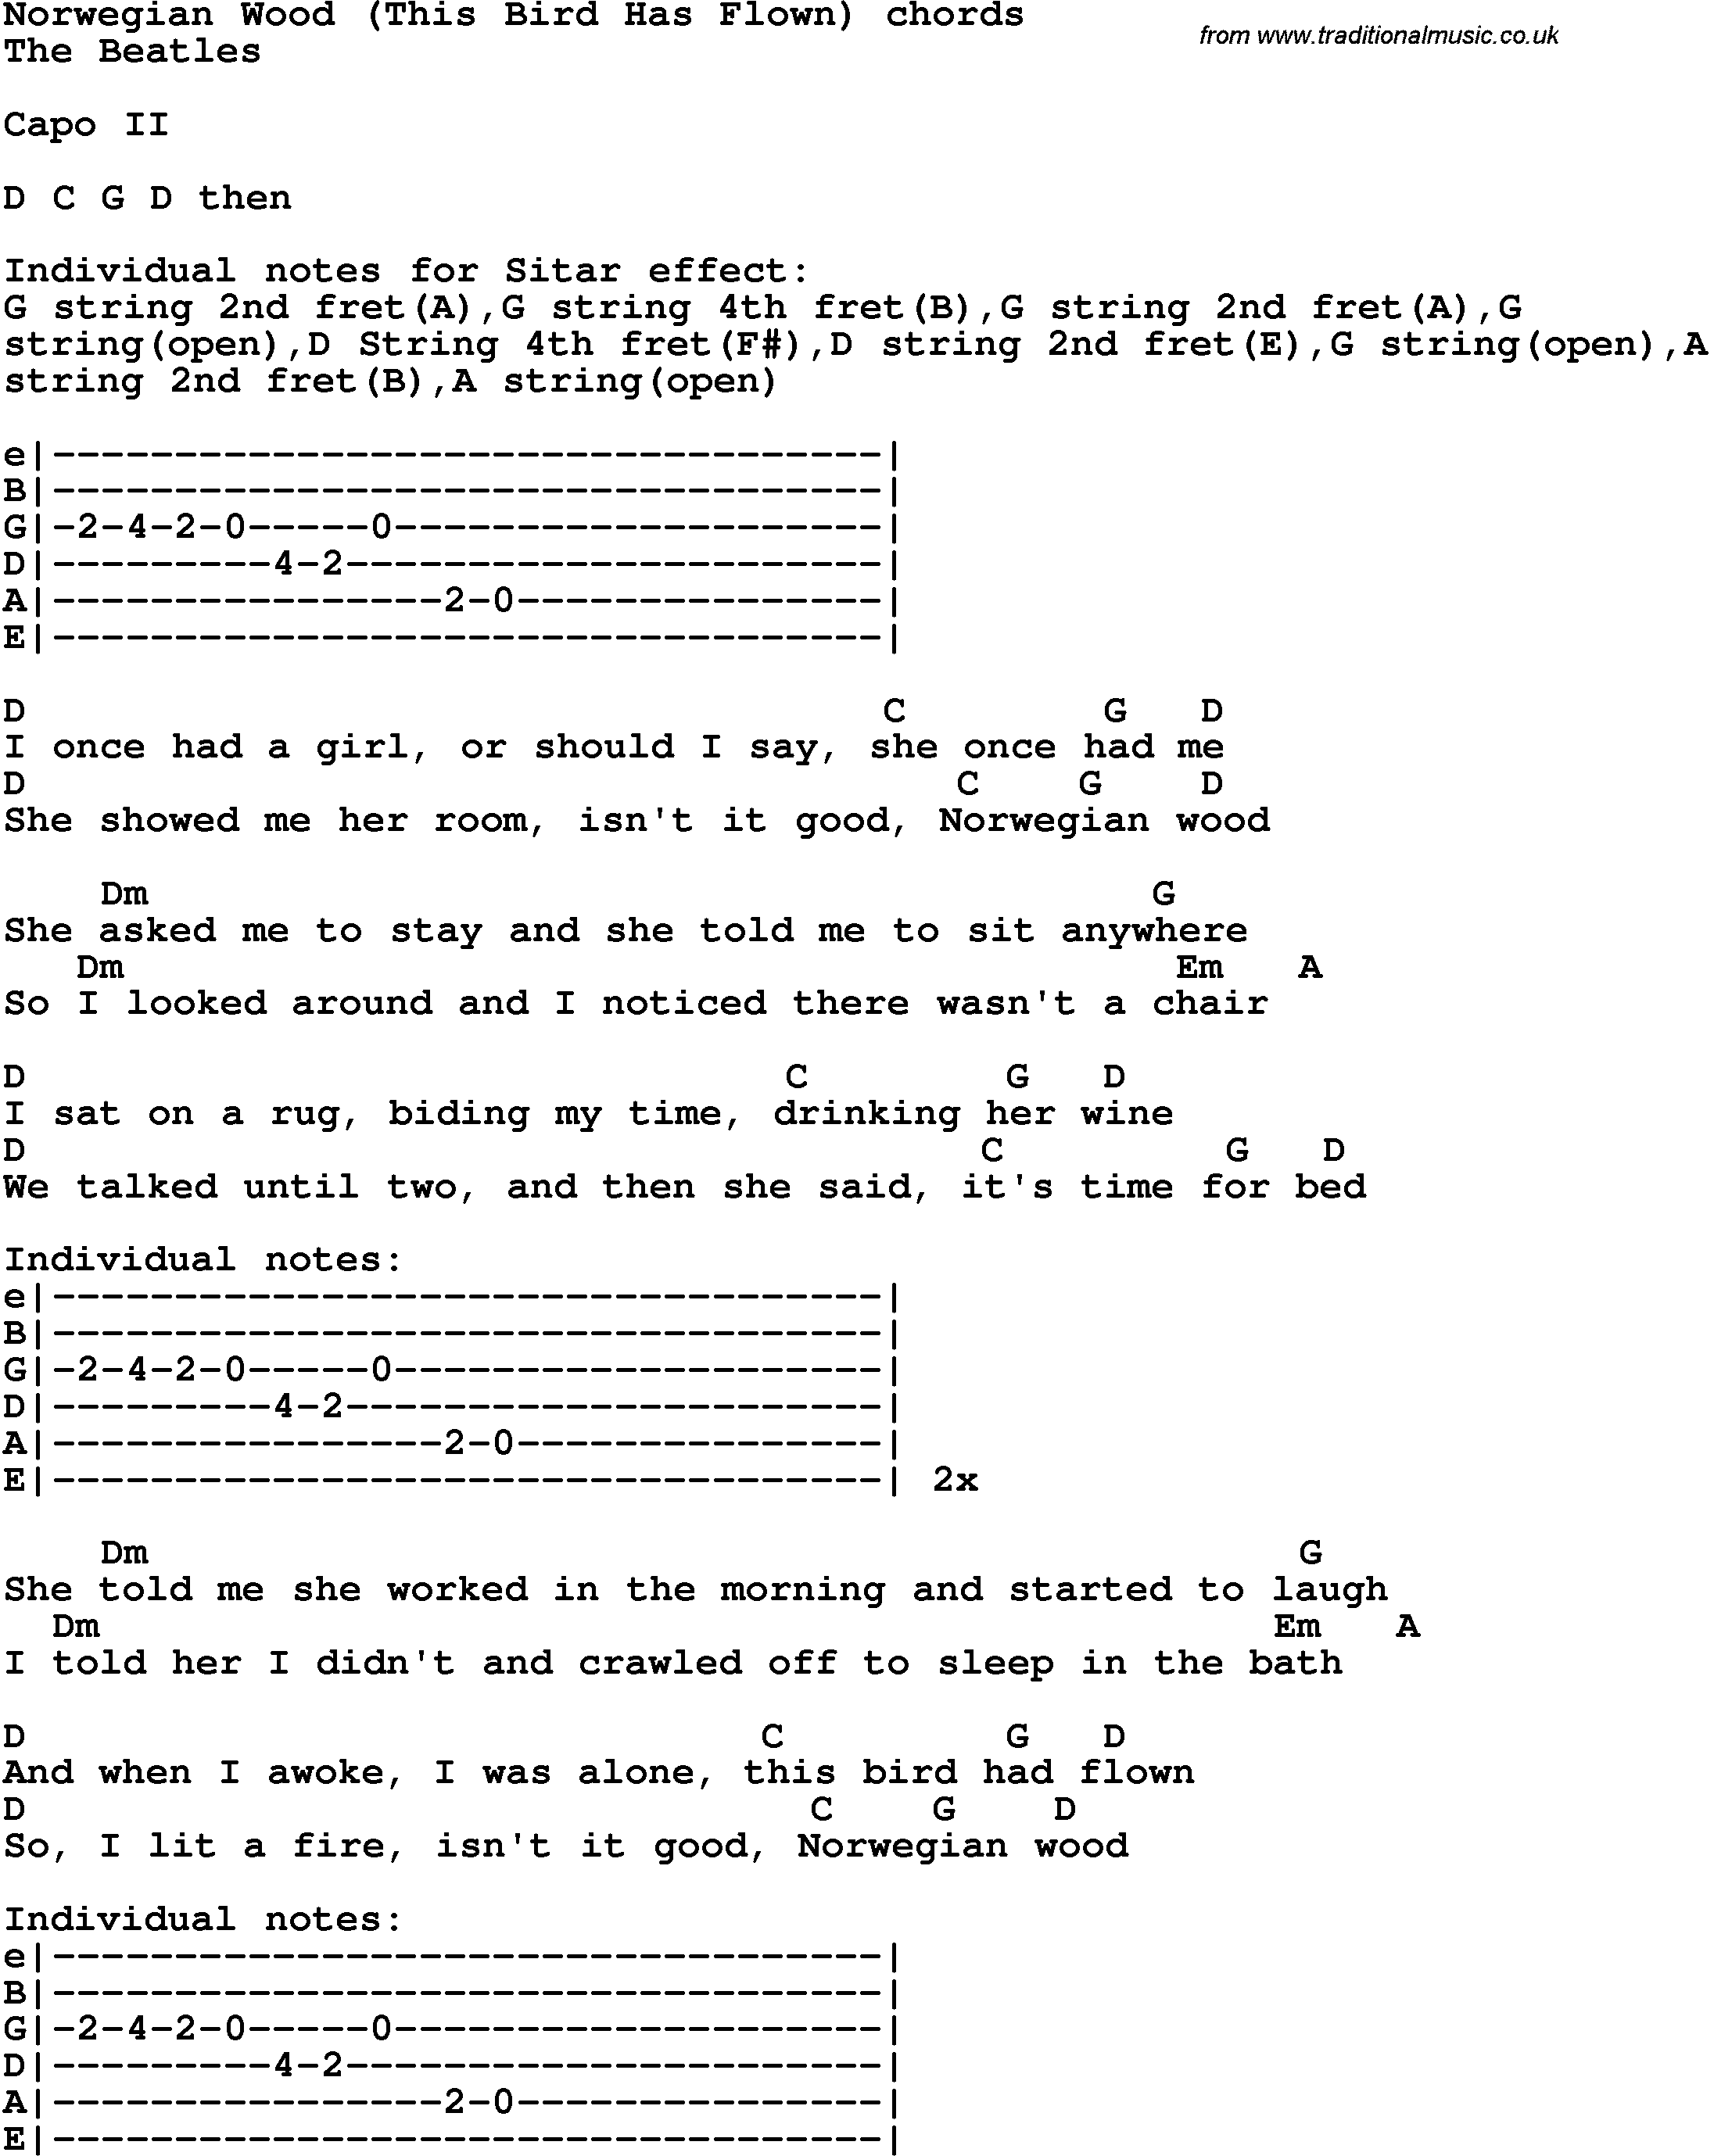 Song Lyrics with guitar chords for Norwegian Wood